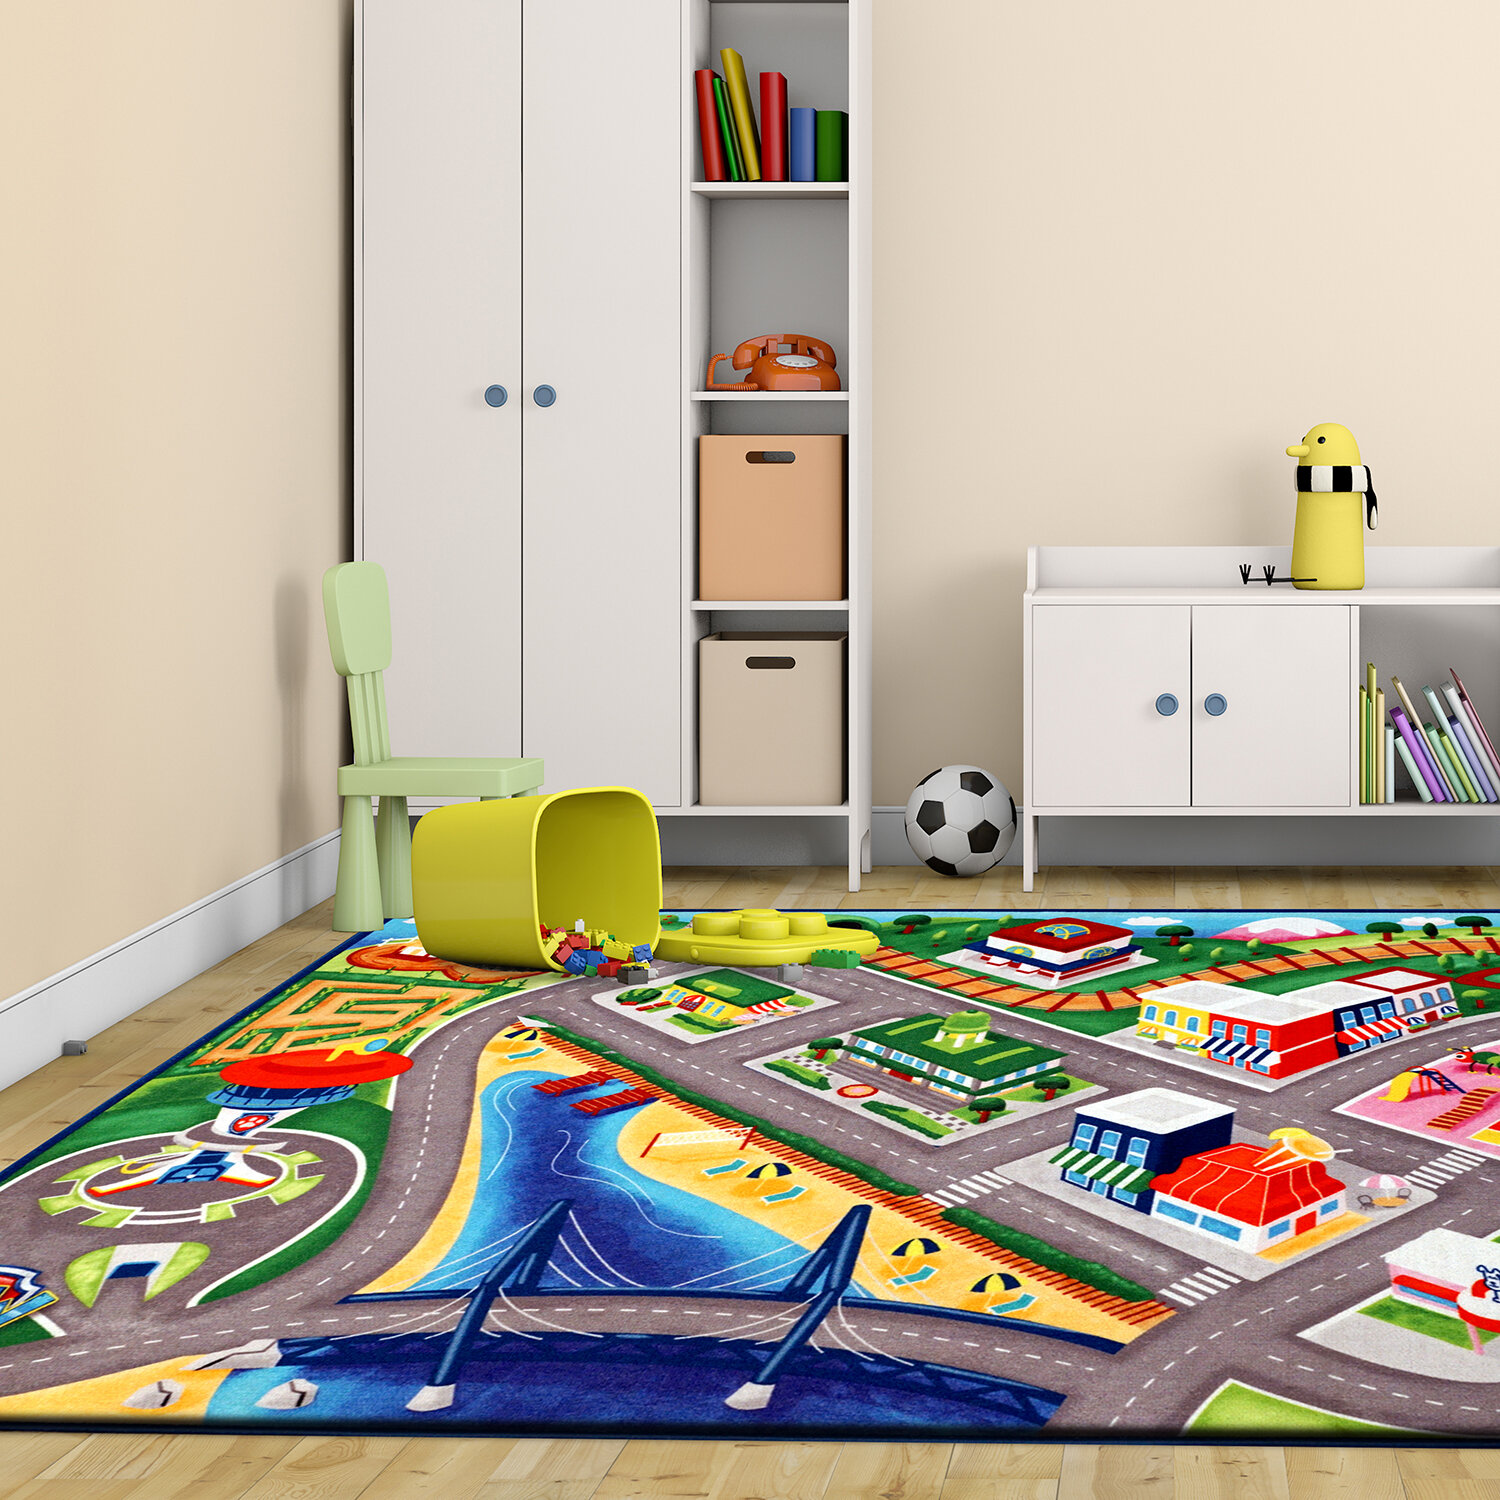 Nickelodeon Licensed Nickelodeon Paw Patrol Road Maps Youth Area